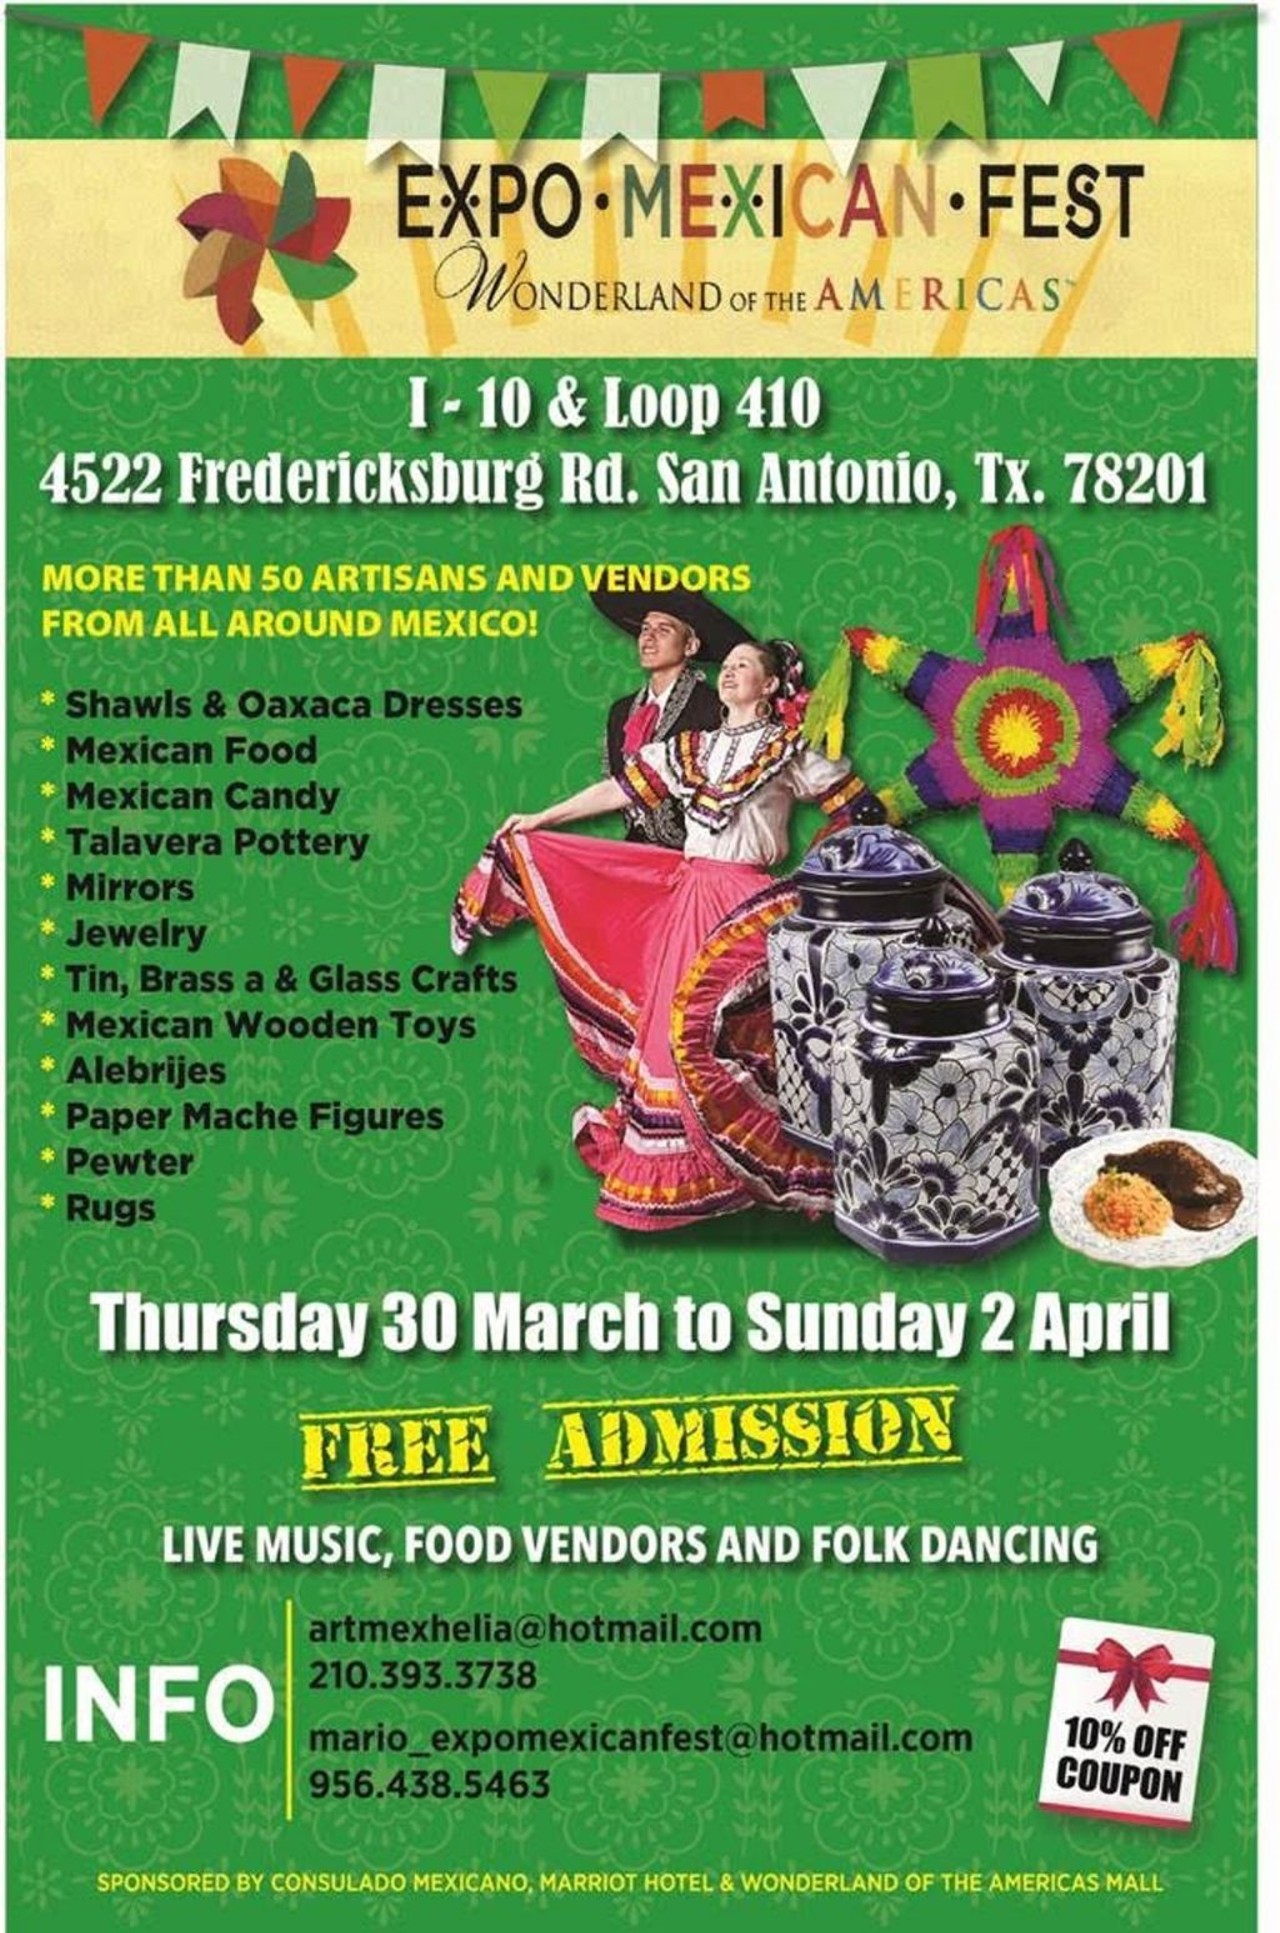 Expo Mexican Fest
March 30-April 2, 9:30 a.m.-7:30 p.m. at Wonderland of the Americas